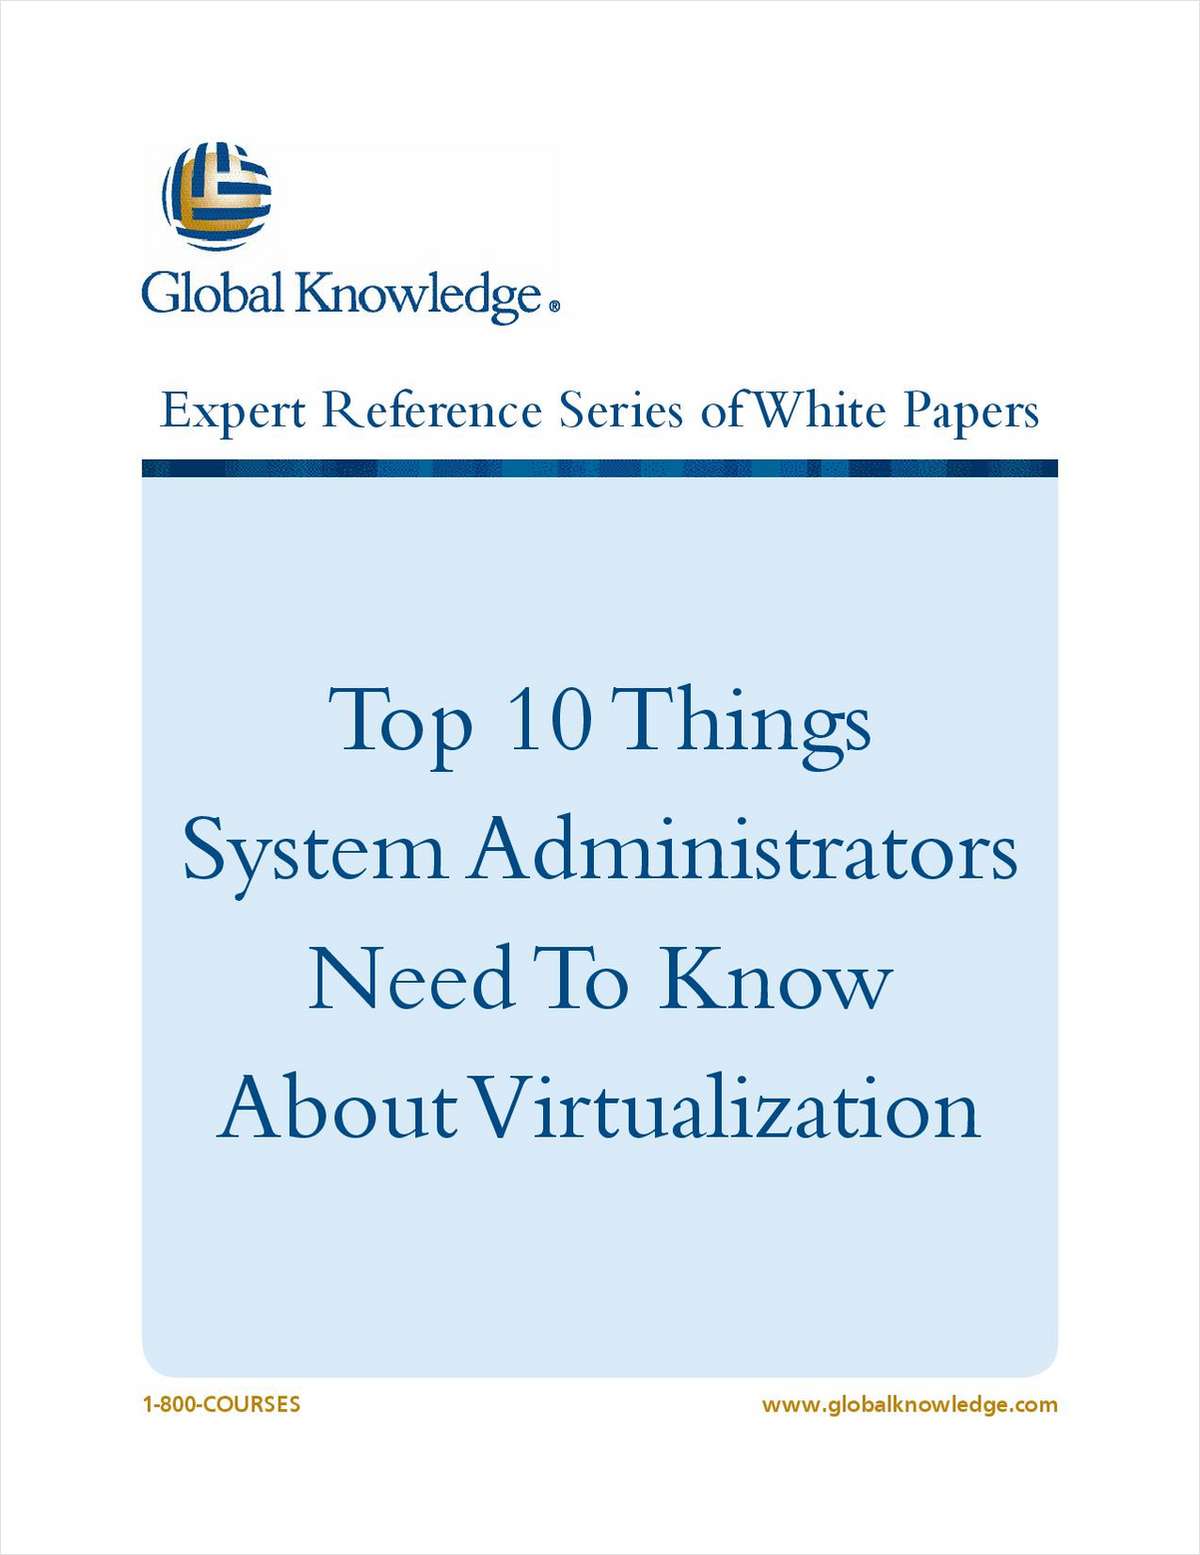 Top 10 Things System Administrators Need to Know About Virtualization